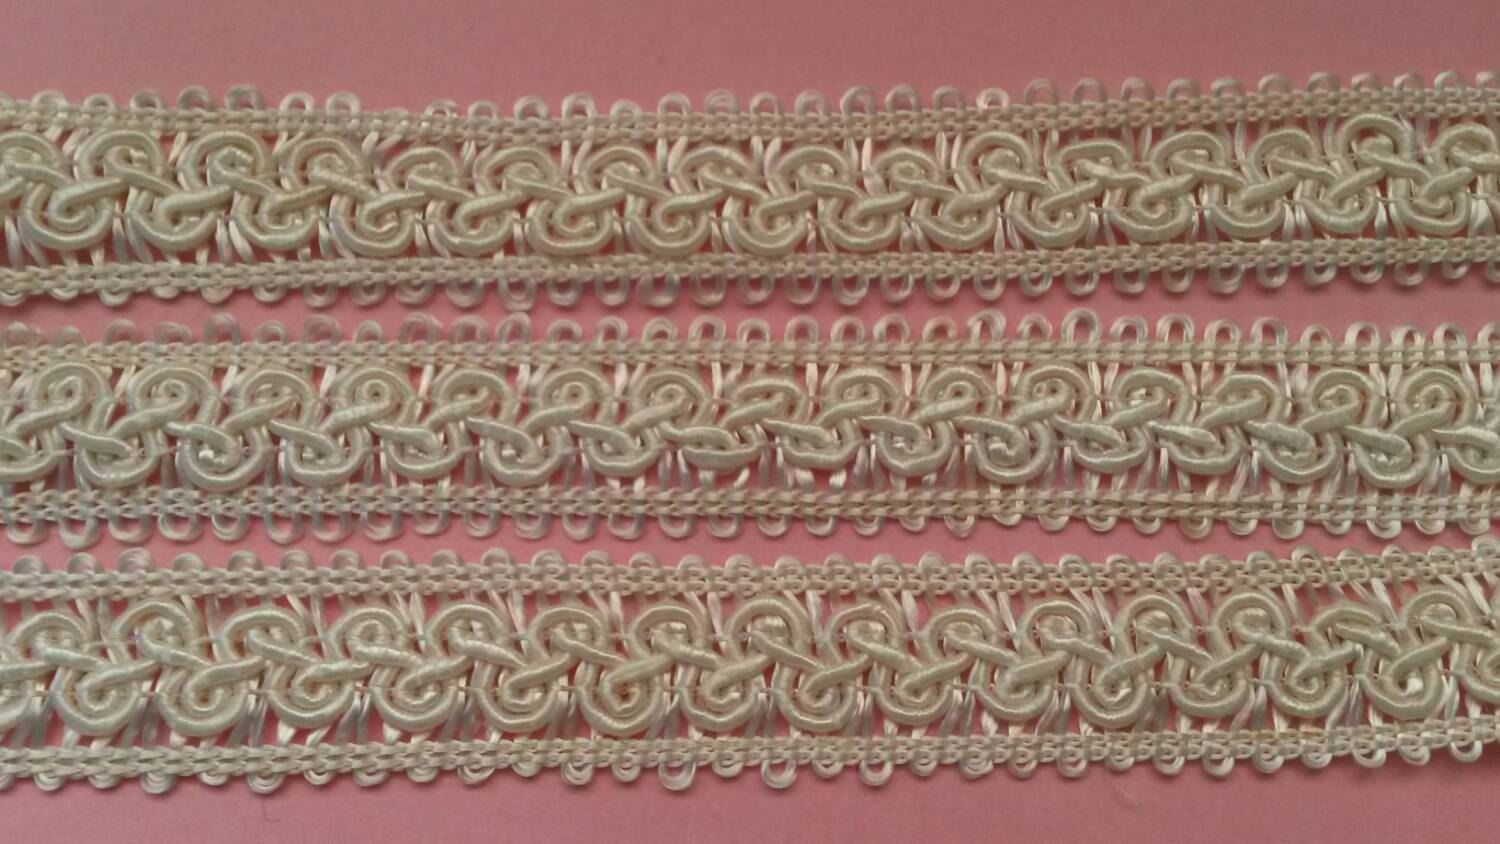 2 Yards White Braided and Cotton Lace Trim by Yard 1 inch